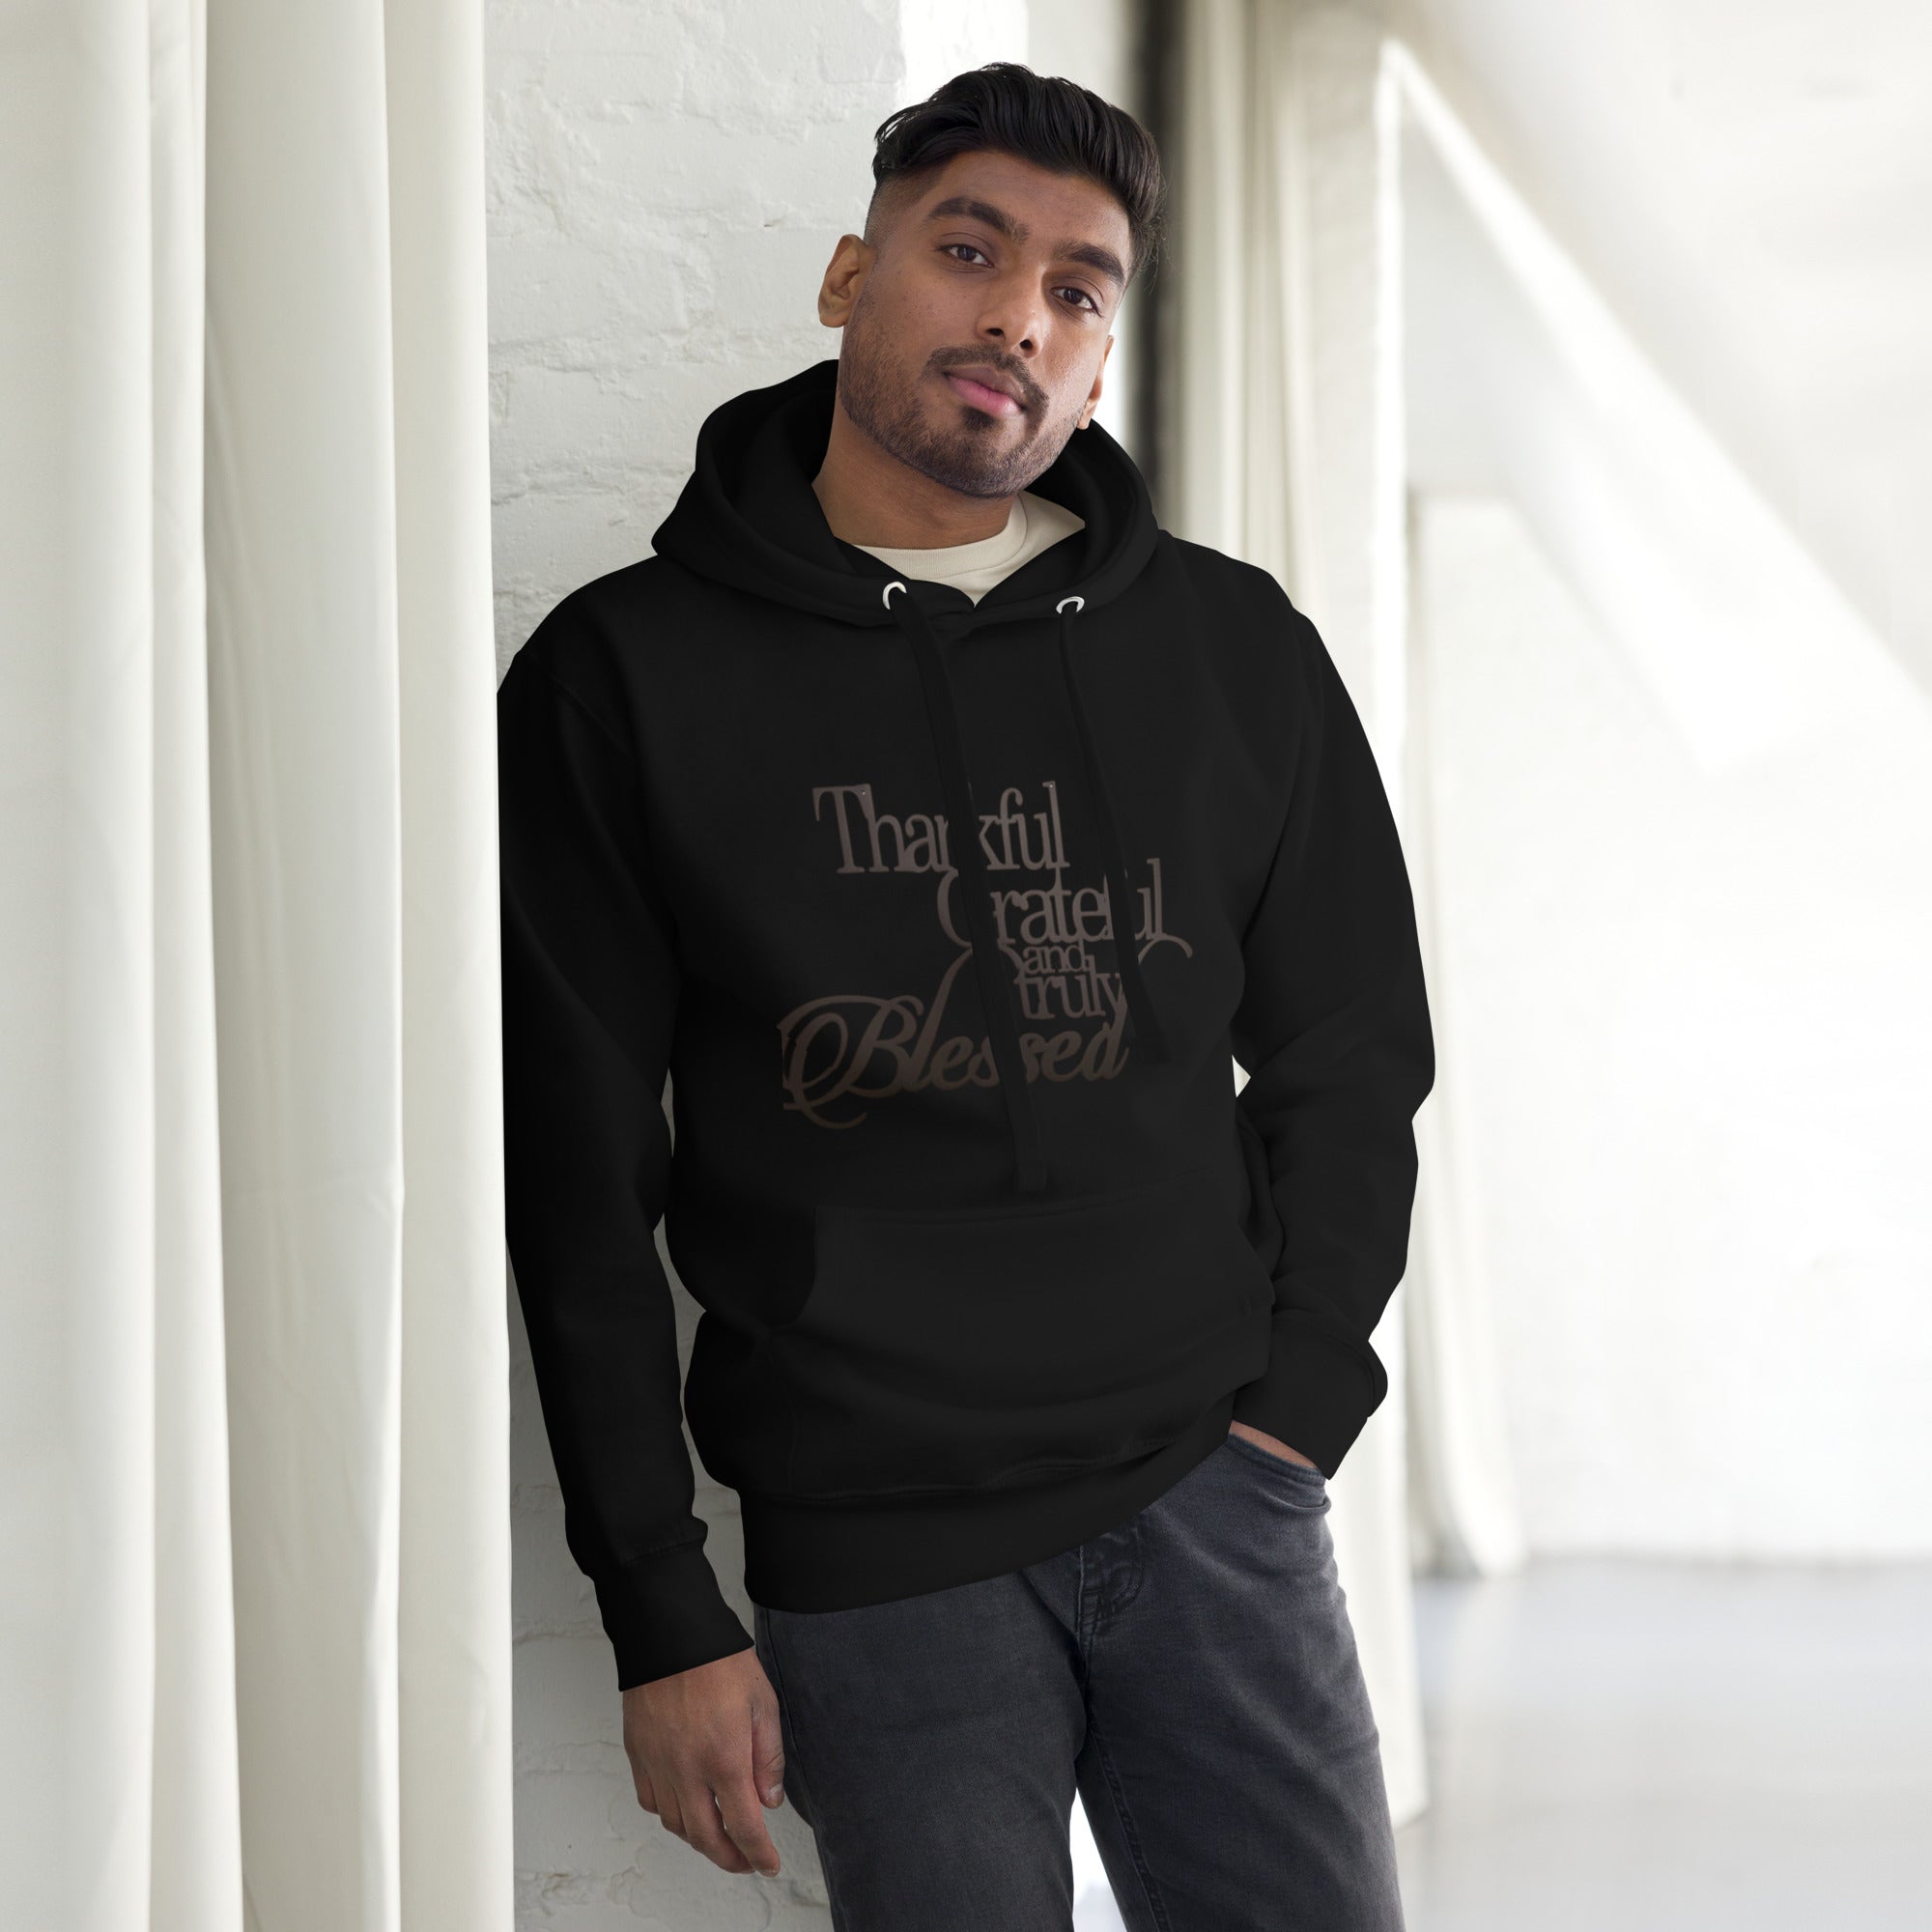 Buy Thankful Grateful & Truly Blessed Unisex Hoodie